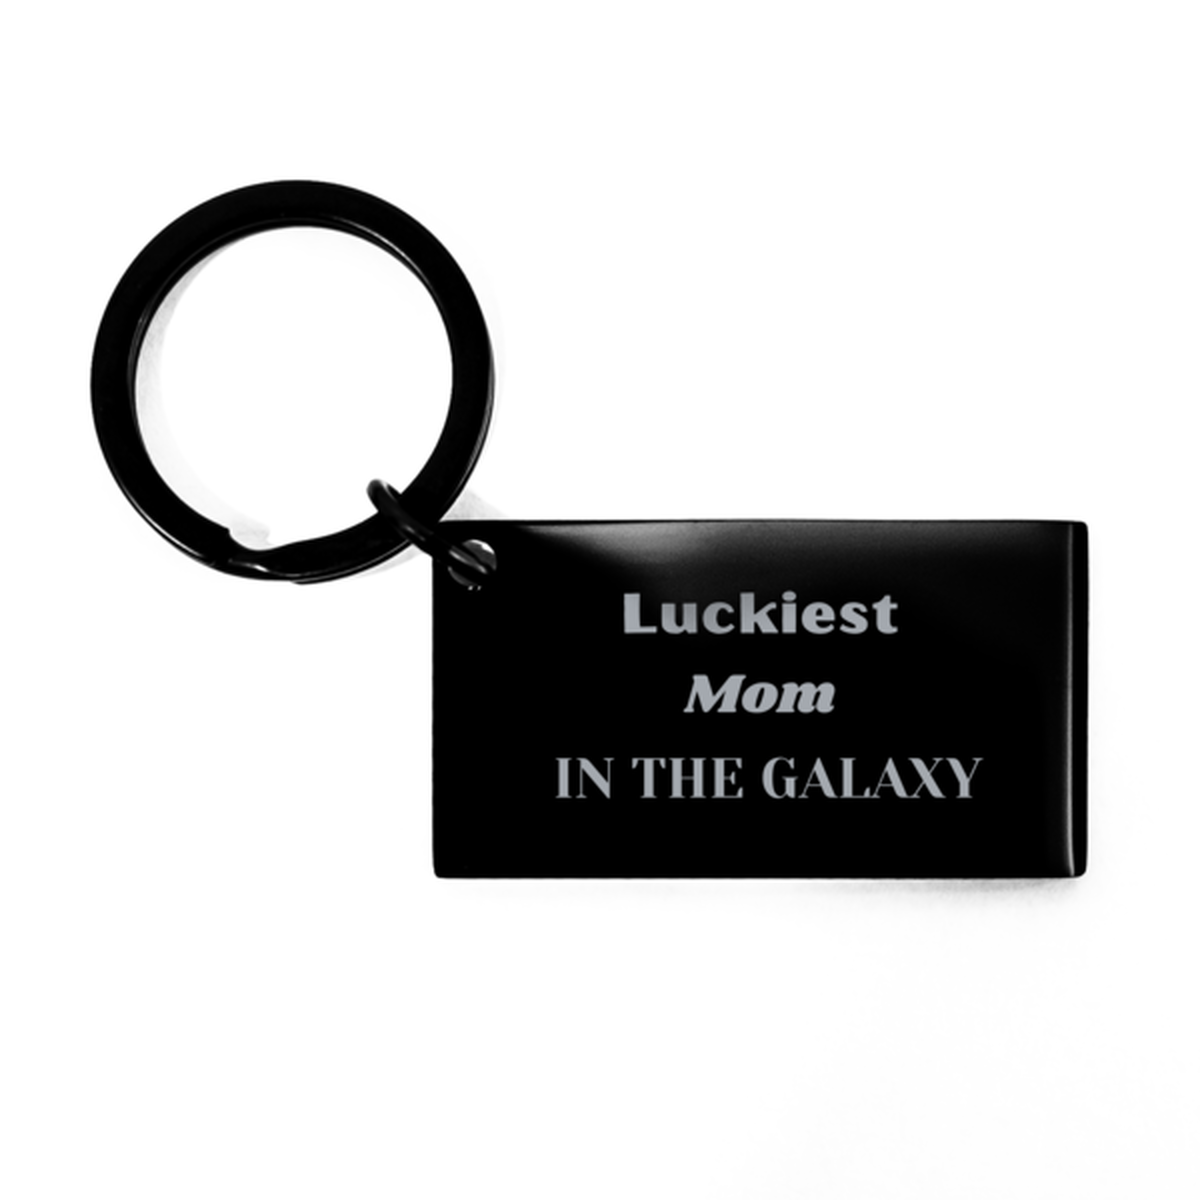 Luckiest Mom in the Galaxy, To My Mom Engraved Gifts, Christmas Mom Keychain Gifts, X-mas Birthday Unique Gifts For Mom Men Women